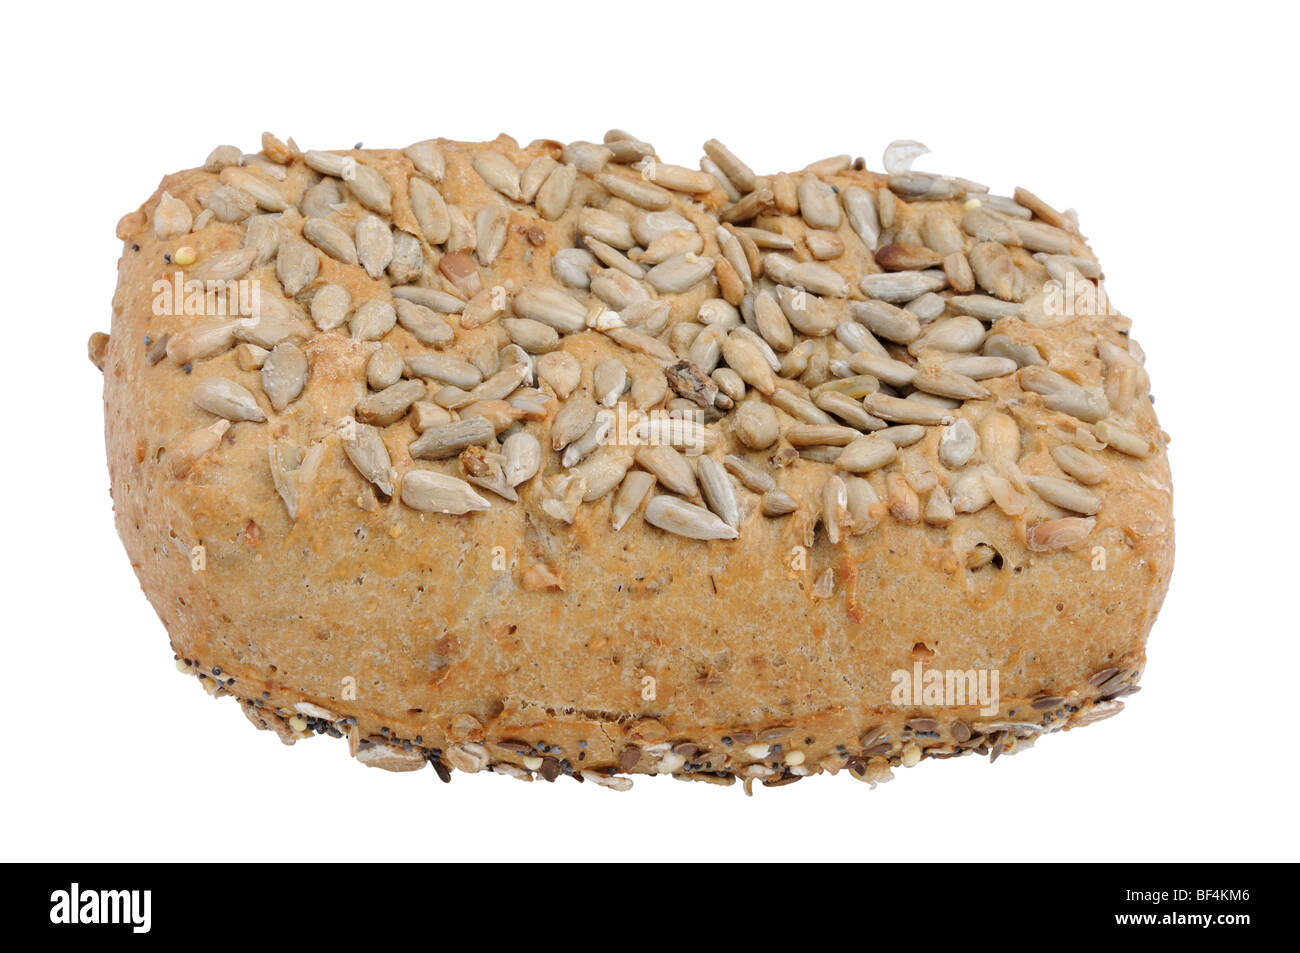 Wholegrain bread roll with sunflower seeds Stock Photo